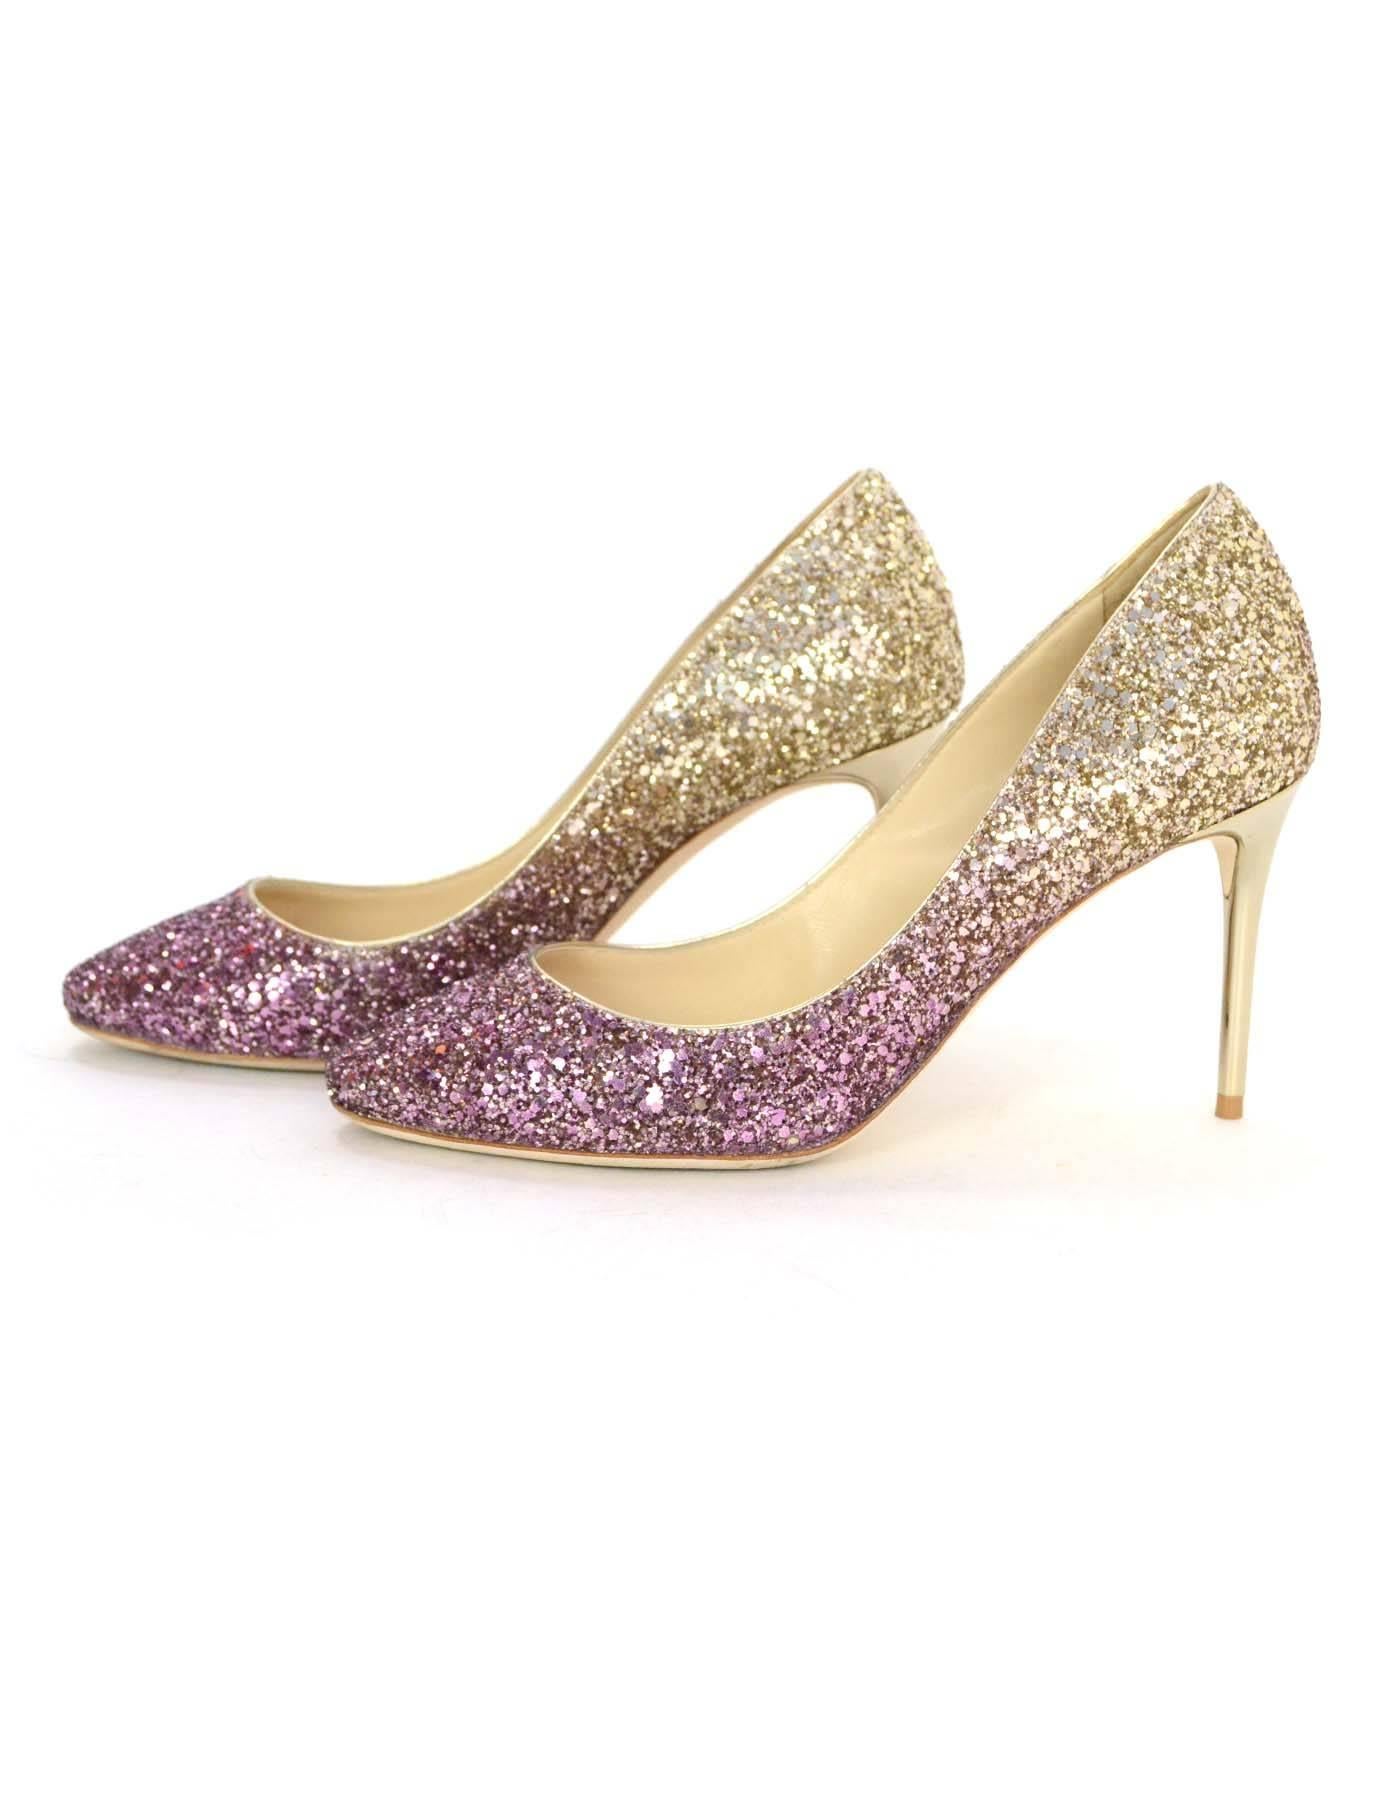 Jimmy Choo Esme Ombre Glitter Pumps Sz 36

Features almond toes and gold heels

Made In: Italy
Color: Pink and gold
Materials: Glitter
Closure/Opening: Slide on
Sole Stamp: Jimmy Choo London Made in Italy 36
Retail Price: $695 +